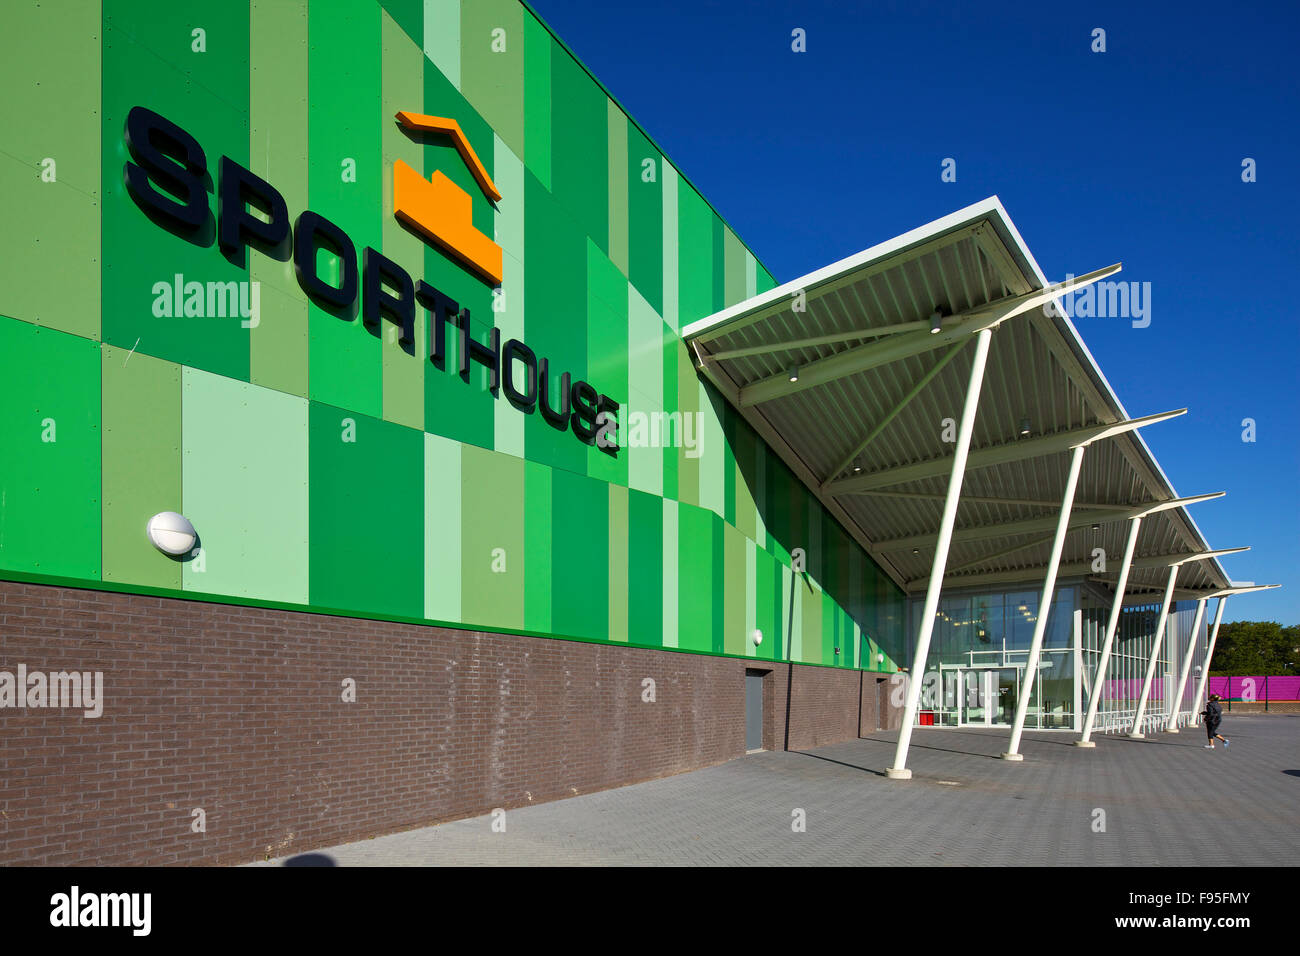 Sporthouse, Mayesbrook Park Sports Arena, Dagenham. Close up of the Sporthouse sign on the exterior wall of the venue. Stock Photo